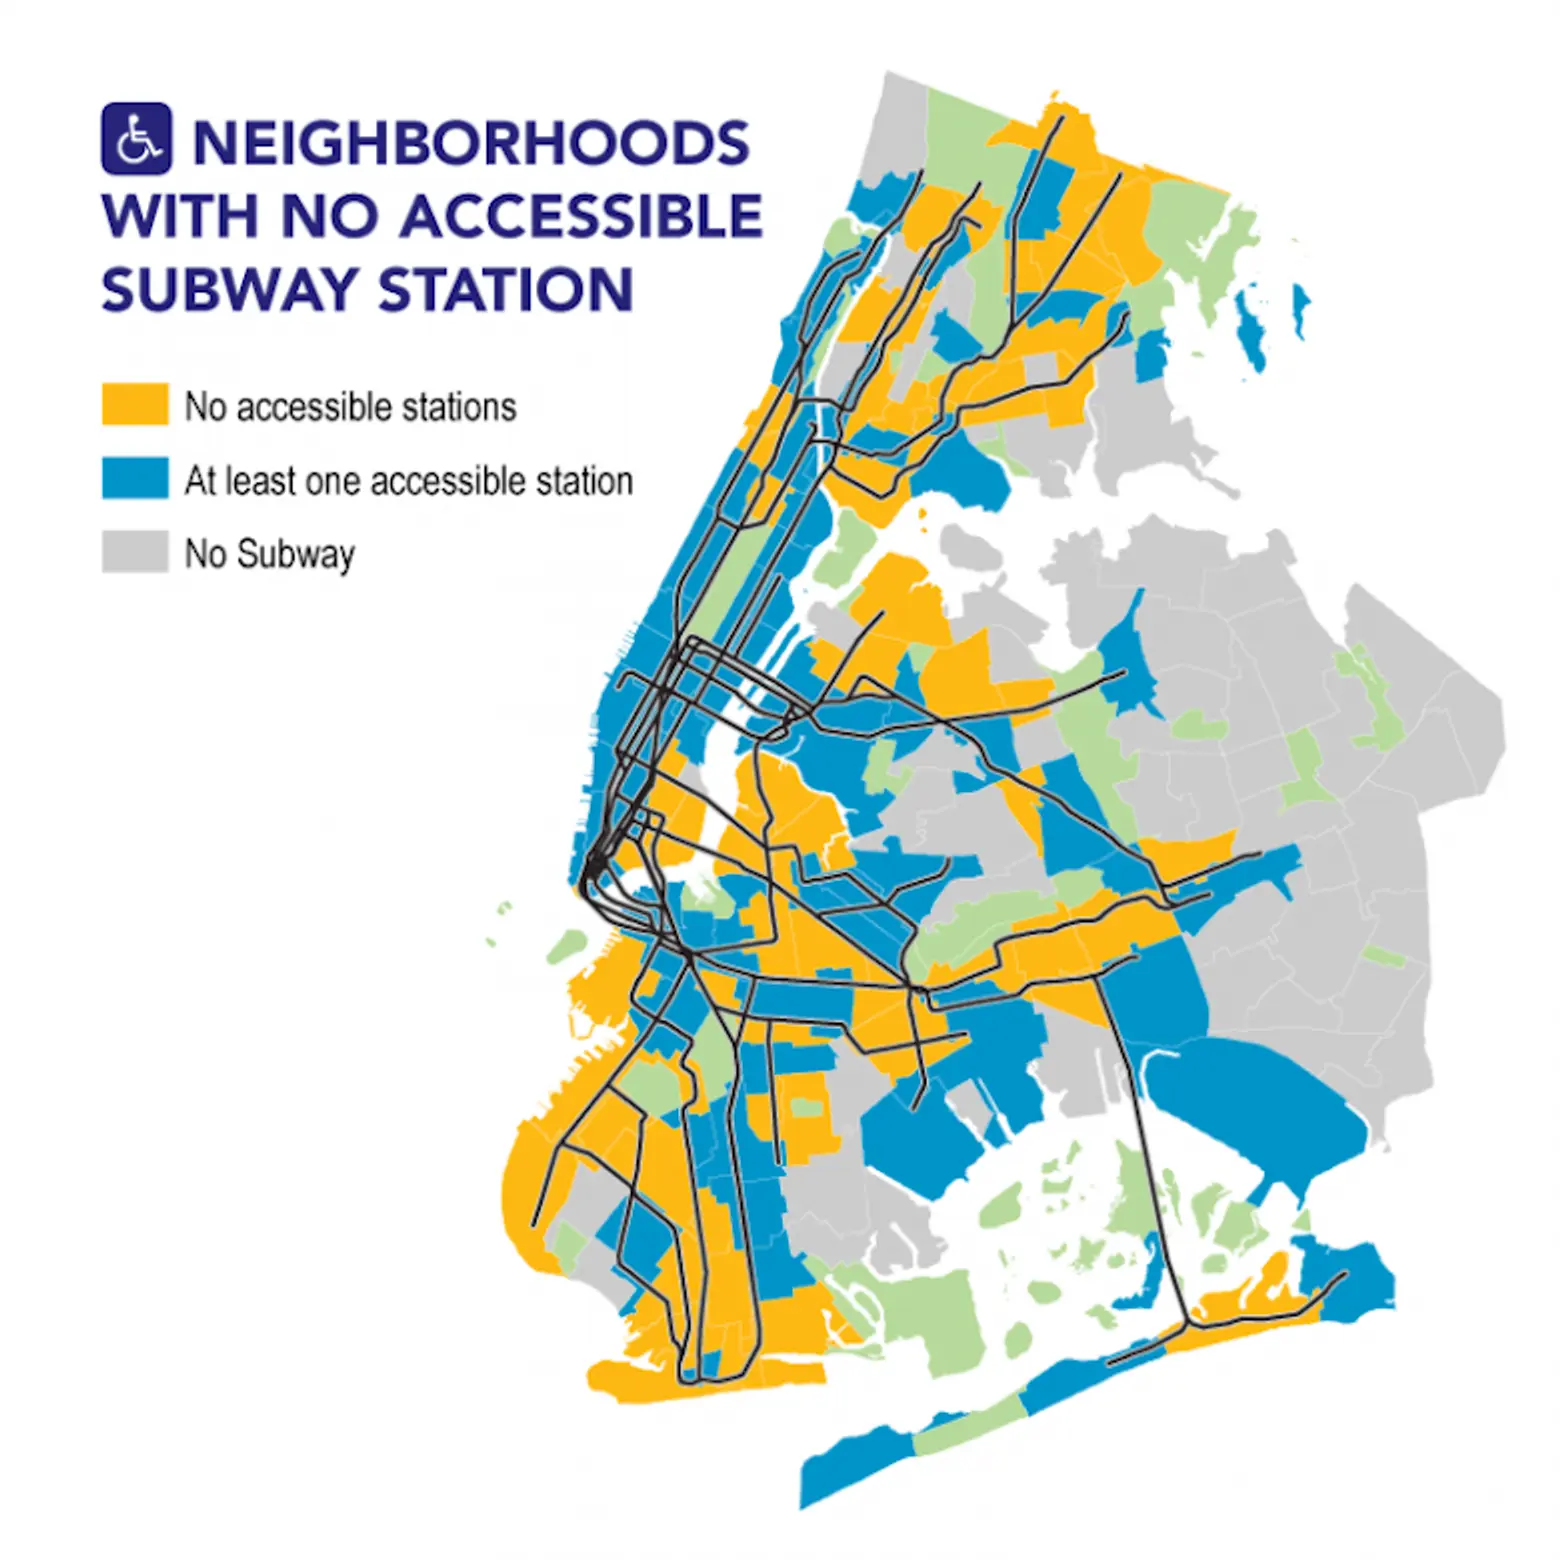 62 New York City neighborhoods lack an accessible subway station